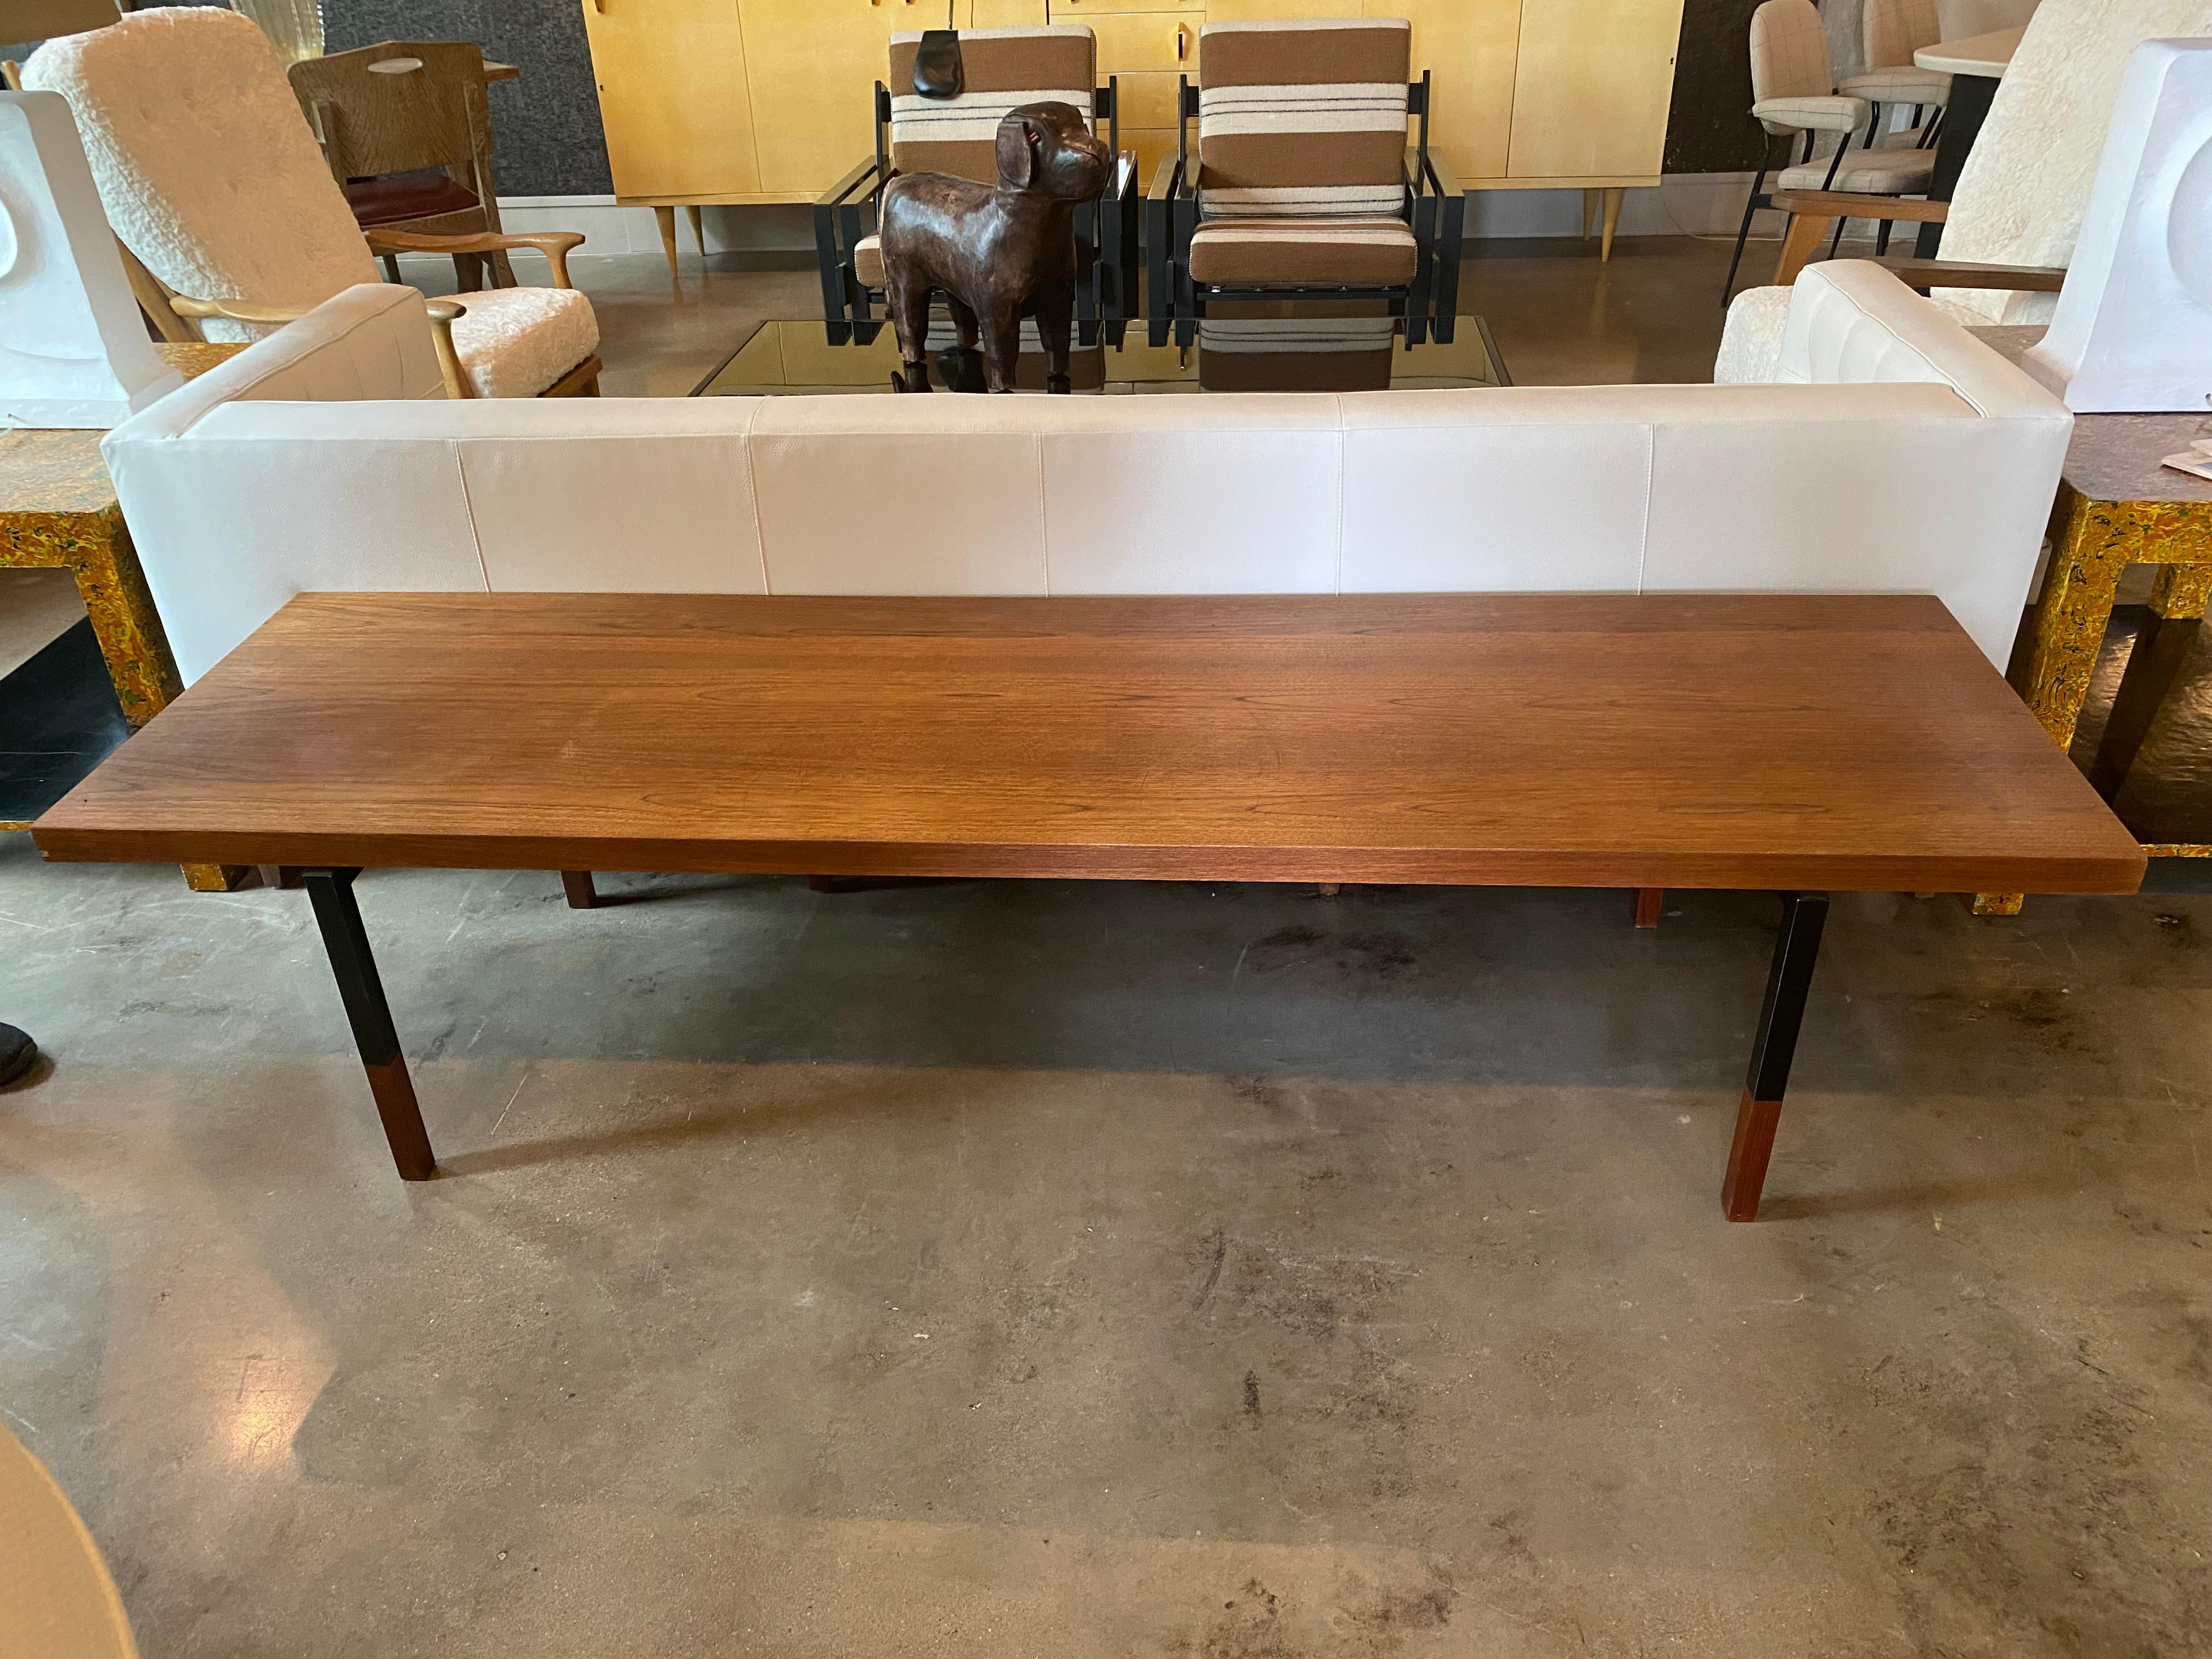 Elongated table or bench of Scandinavian mid-century styling. Teak or rosewood top with steel legs and wood feet. Denmark, 1950's.